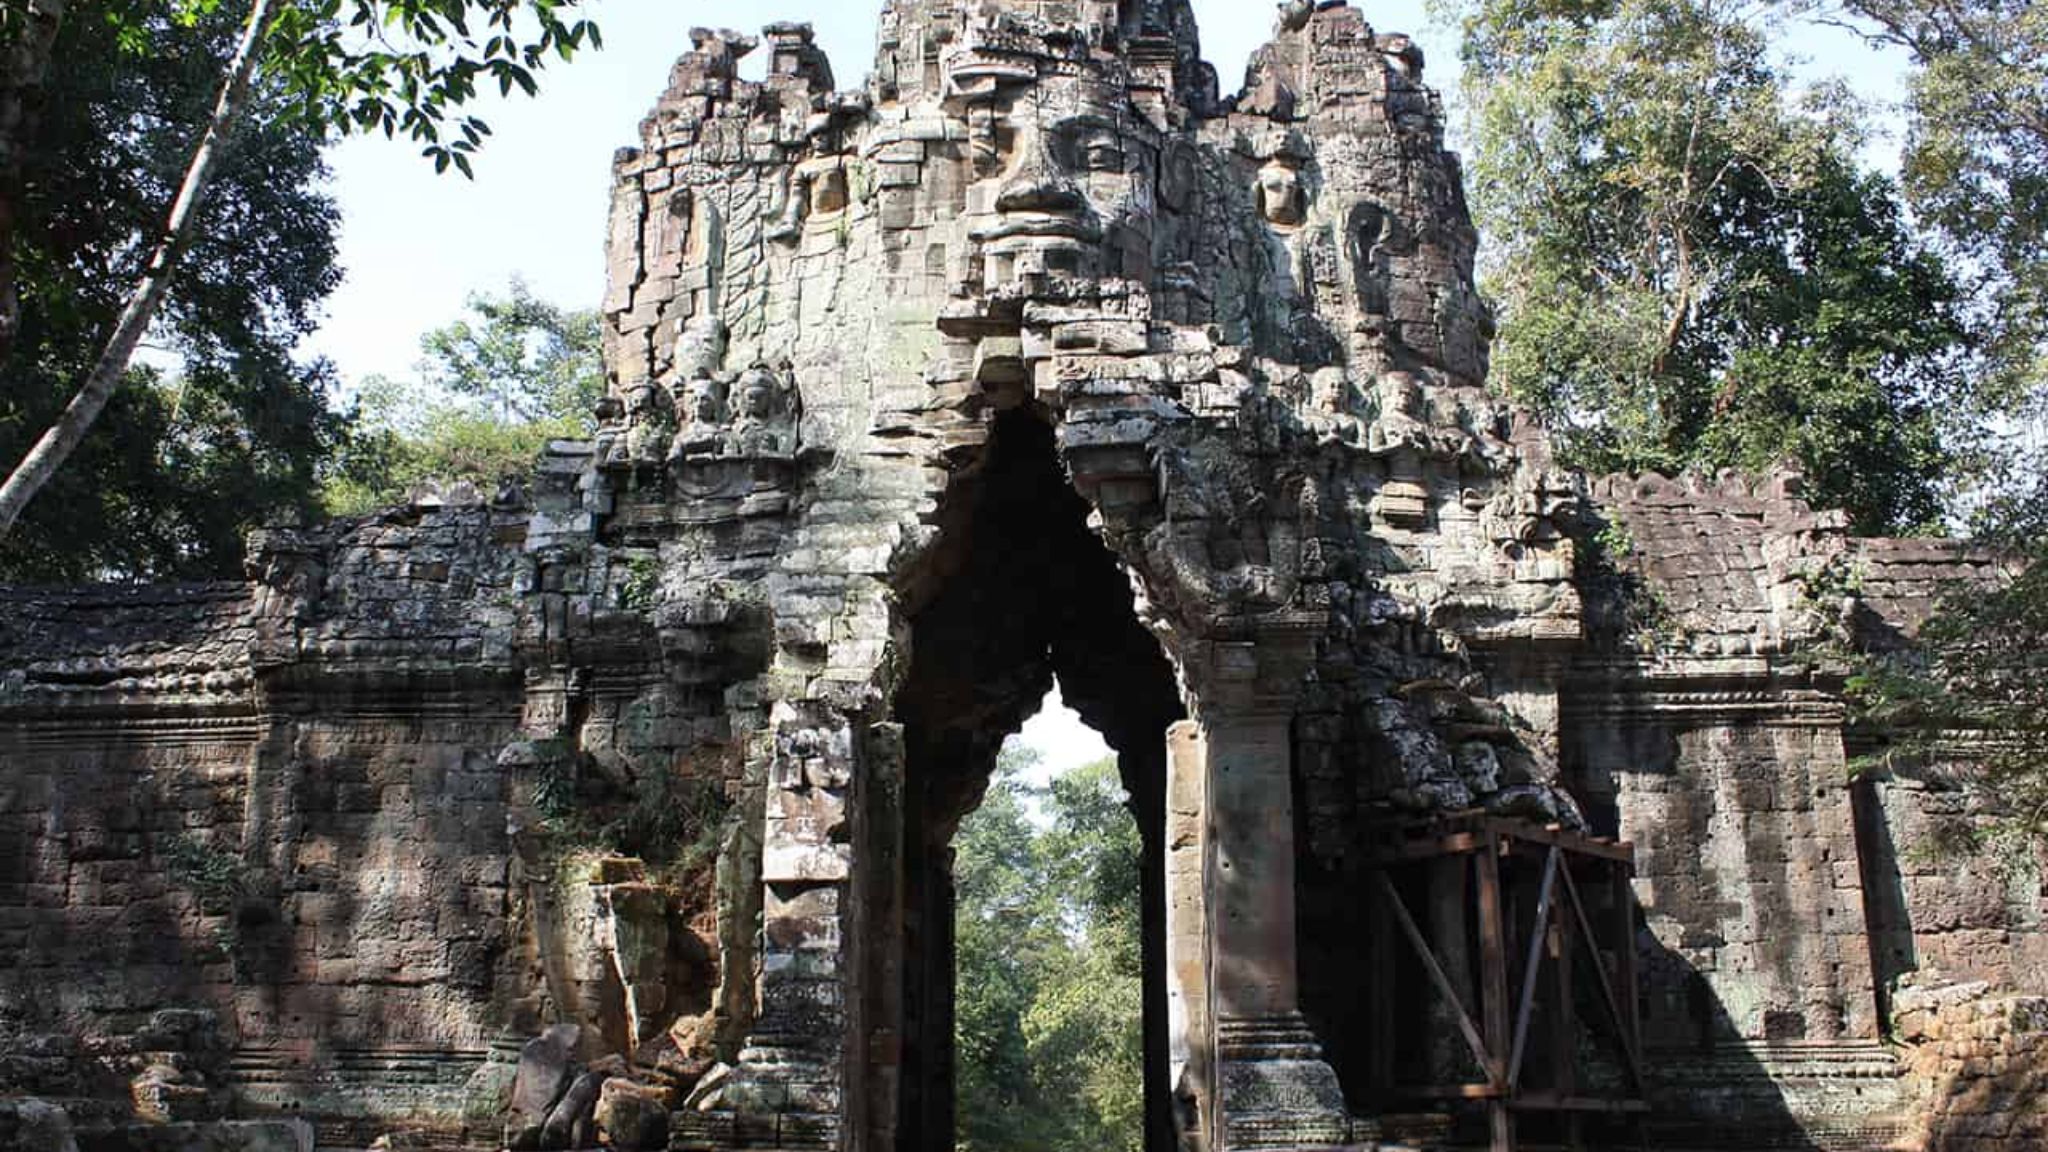 Day 2 Reach The Last Capital Of The Great Khmer Empire